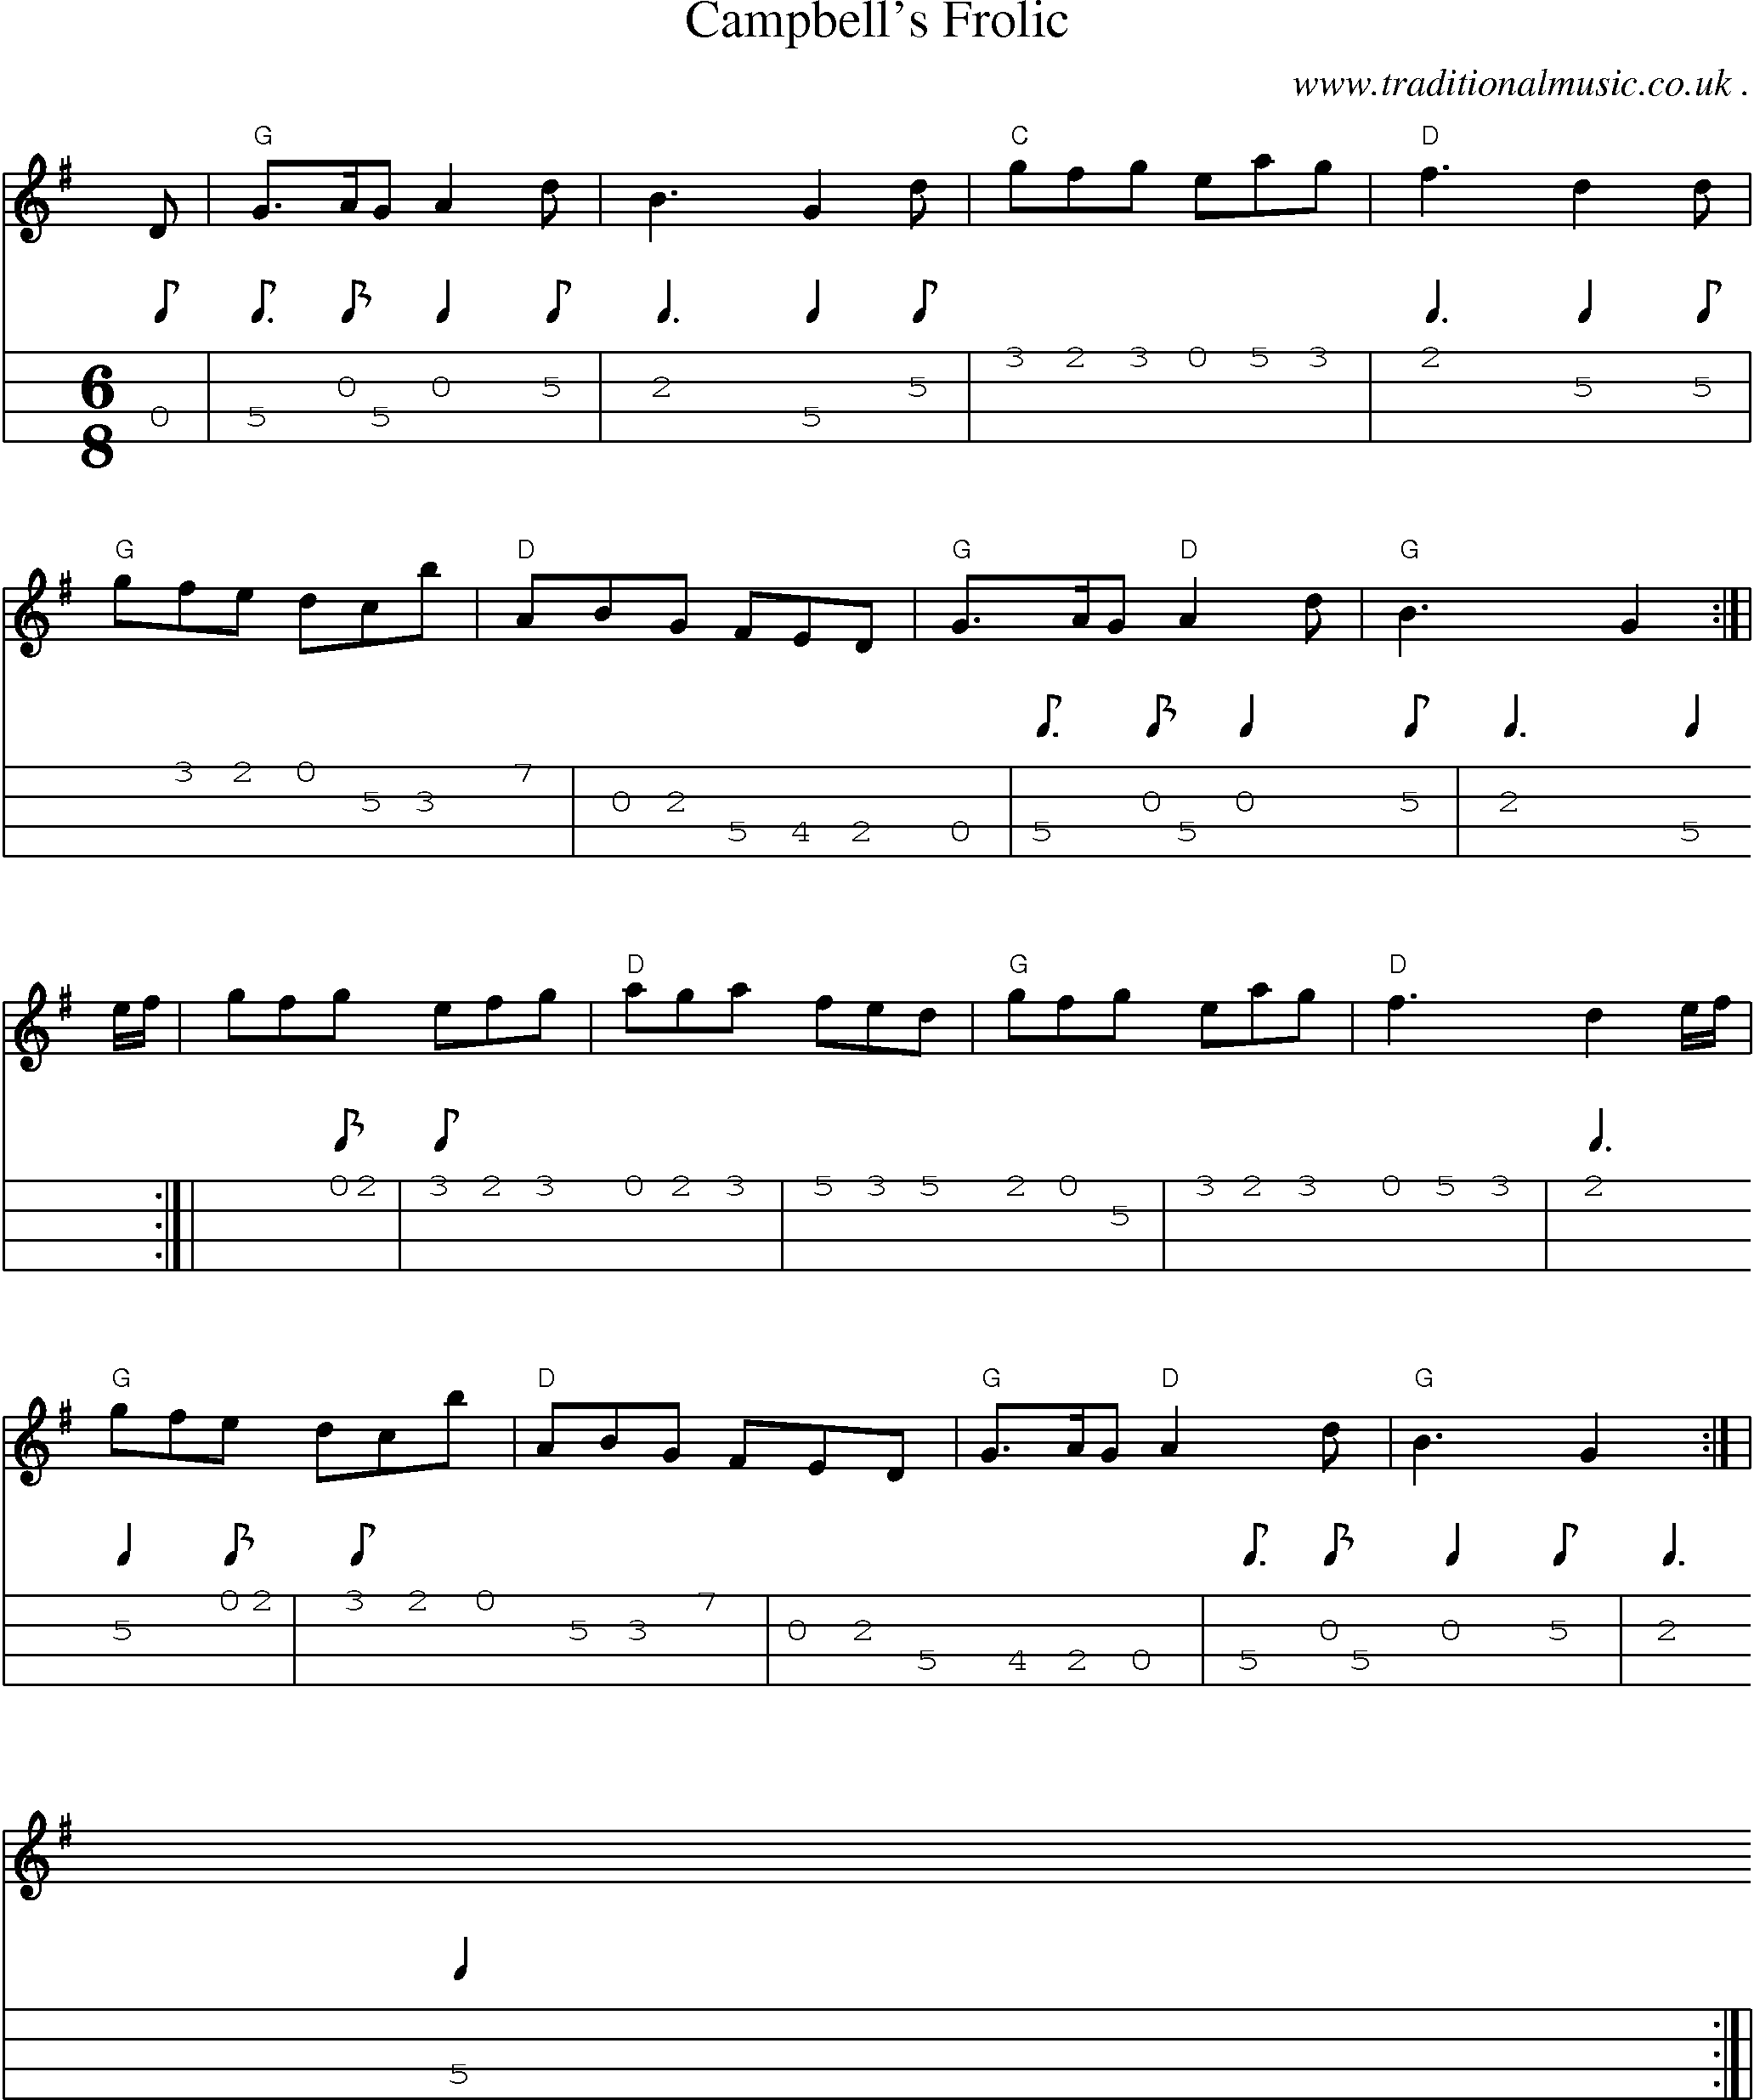 Sheet-music  score, Chords and Mandolin Tabs for Campbells Frolic